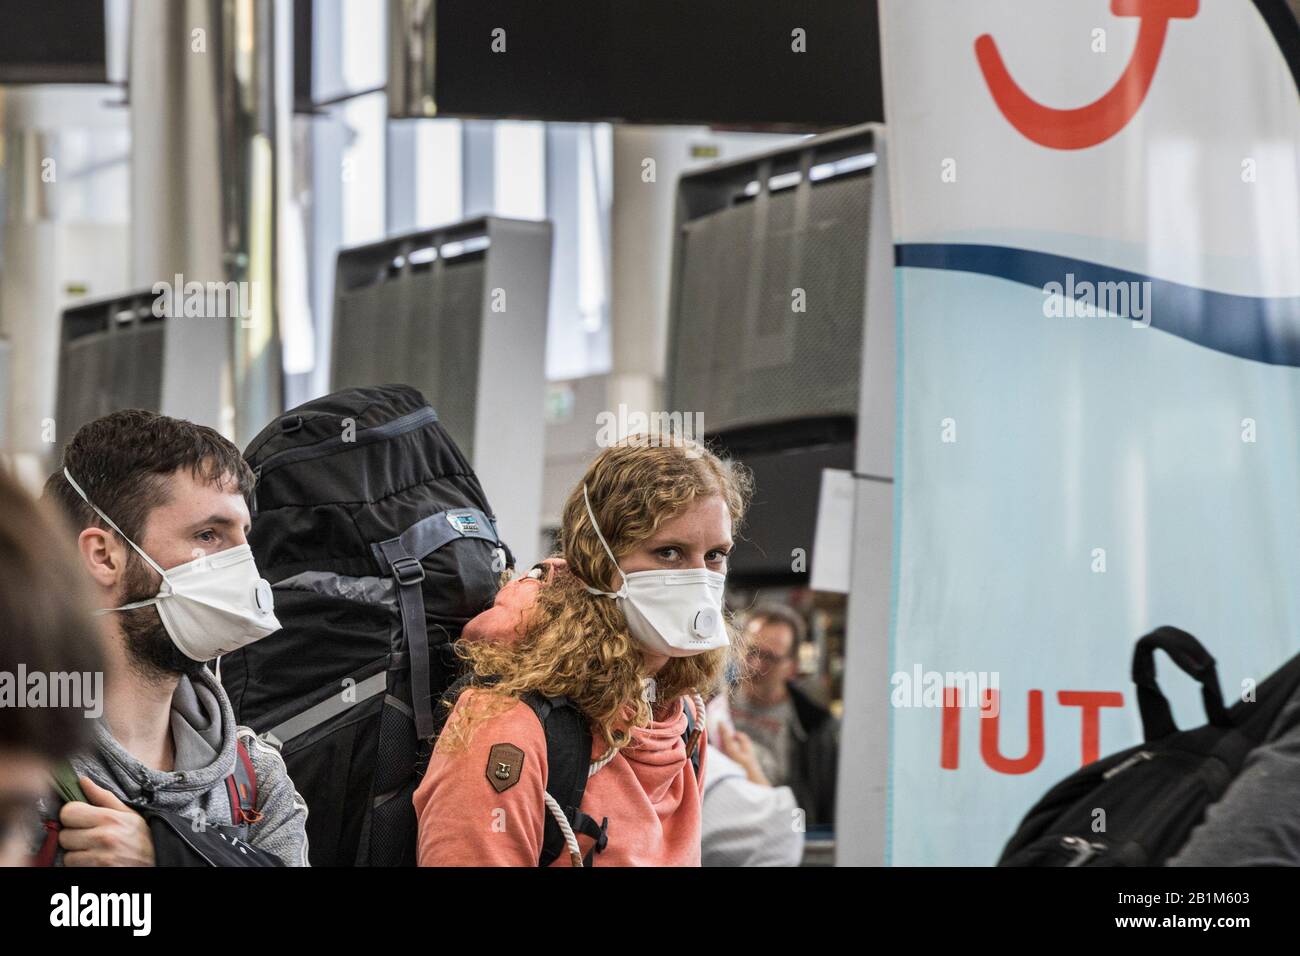 Tenerife South Airport, Canary Islands, 26th February 2020. Holidaymakers arriving at Tenerife South airport wearing face masks after the H10 Costa Adeje Palace hotel is put into a quarintine lockdown due to corona virus outbreak confirmed in four Italian tourists. Stock Photo